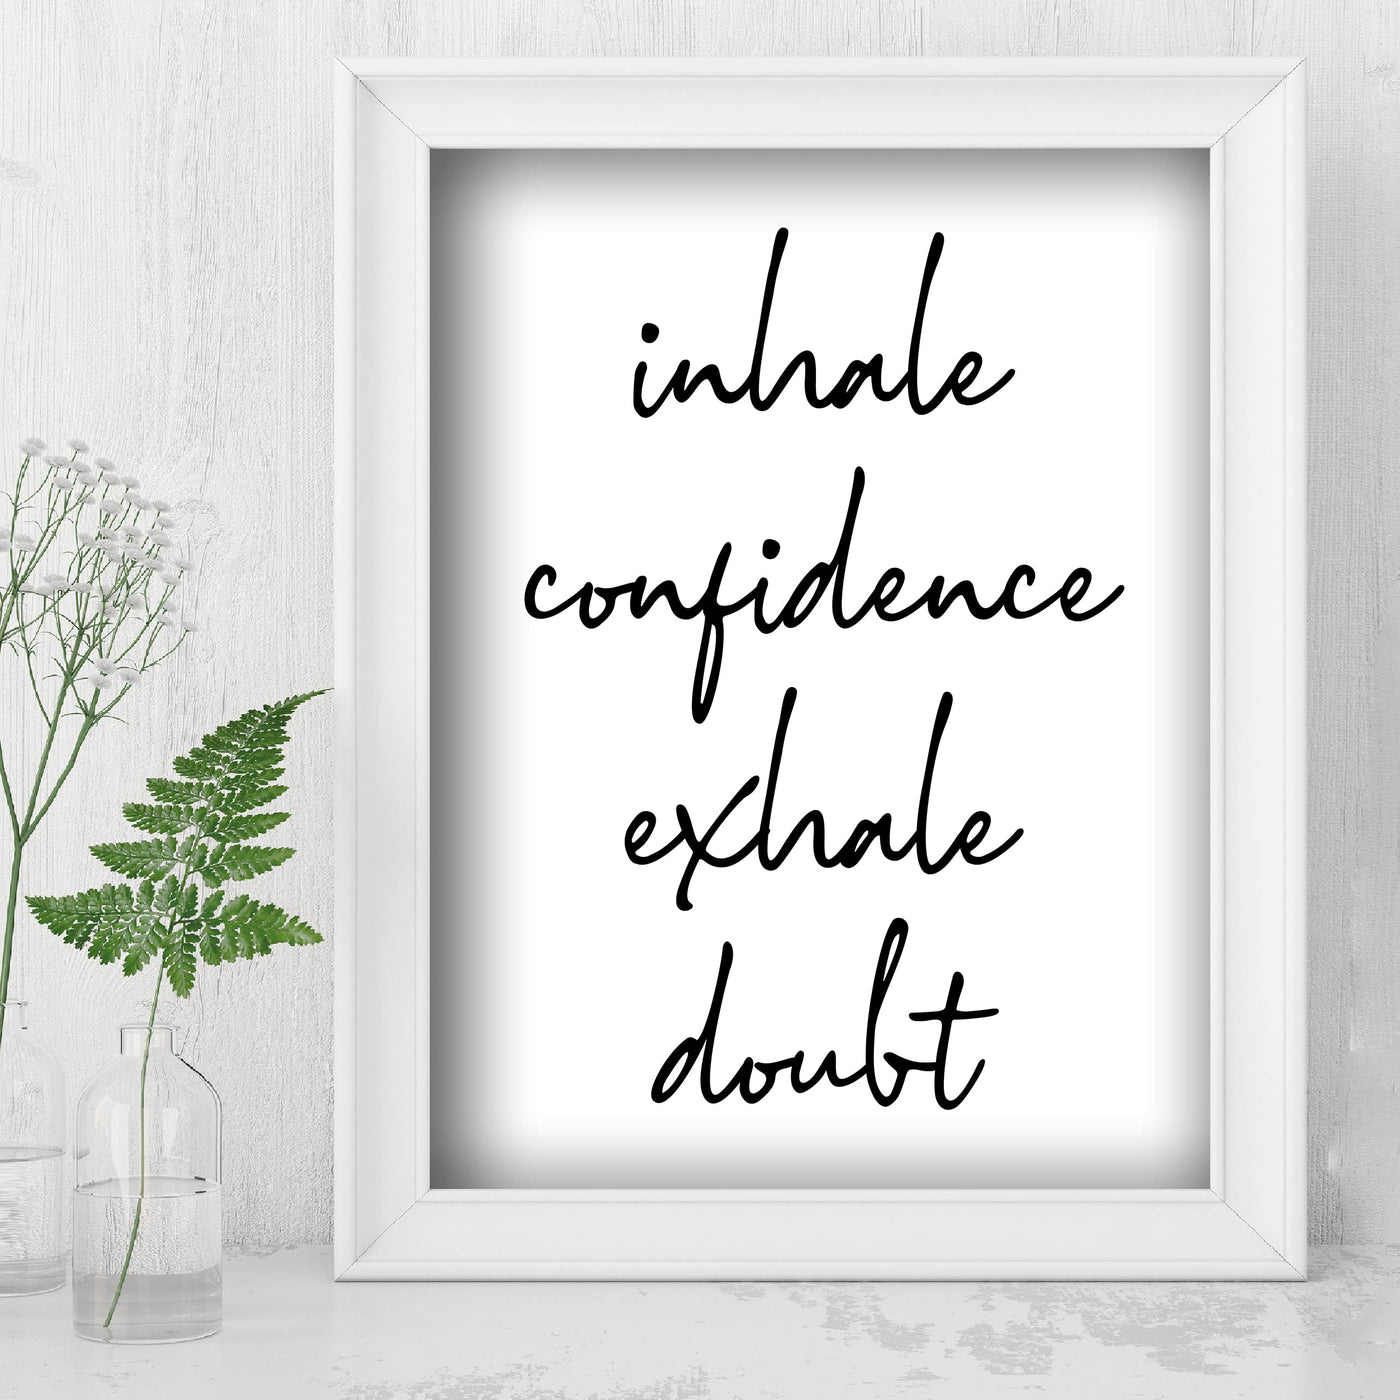 Inhale Confidence-Exhale Doubt-Spiritual Quotes Wall Art - 8 x 10" Inspirational Typographic Print-Ready to Frame. Motivational Home-Office-School-Yoga Studio-Spa Decor. Great Reminder to Breathe!